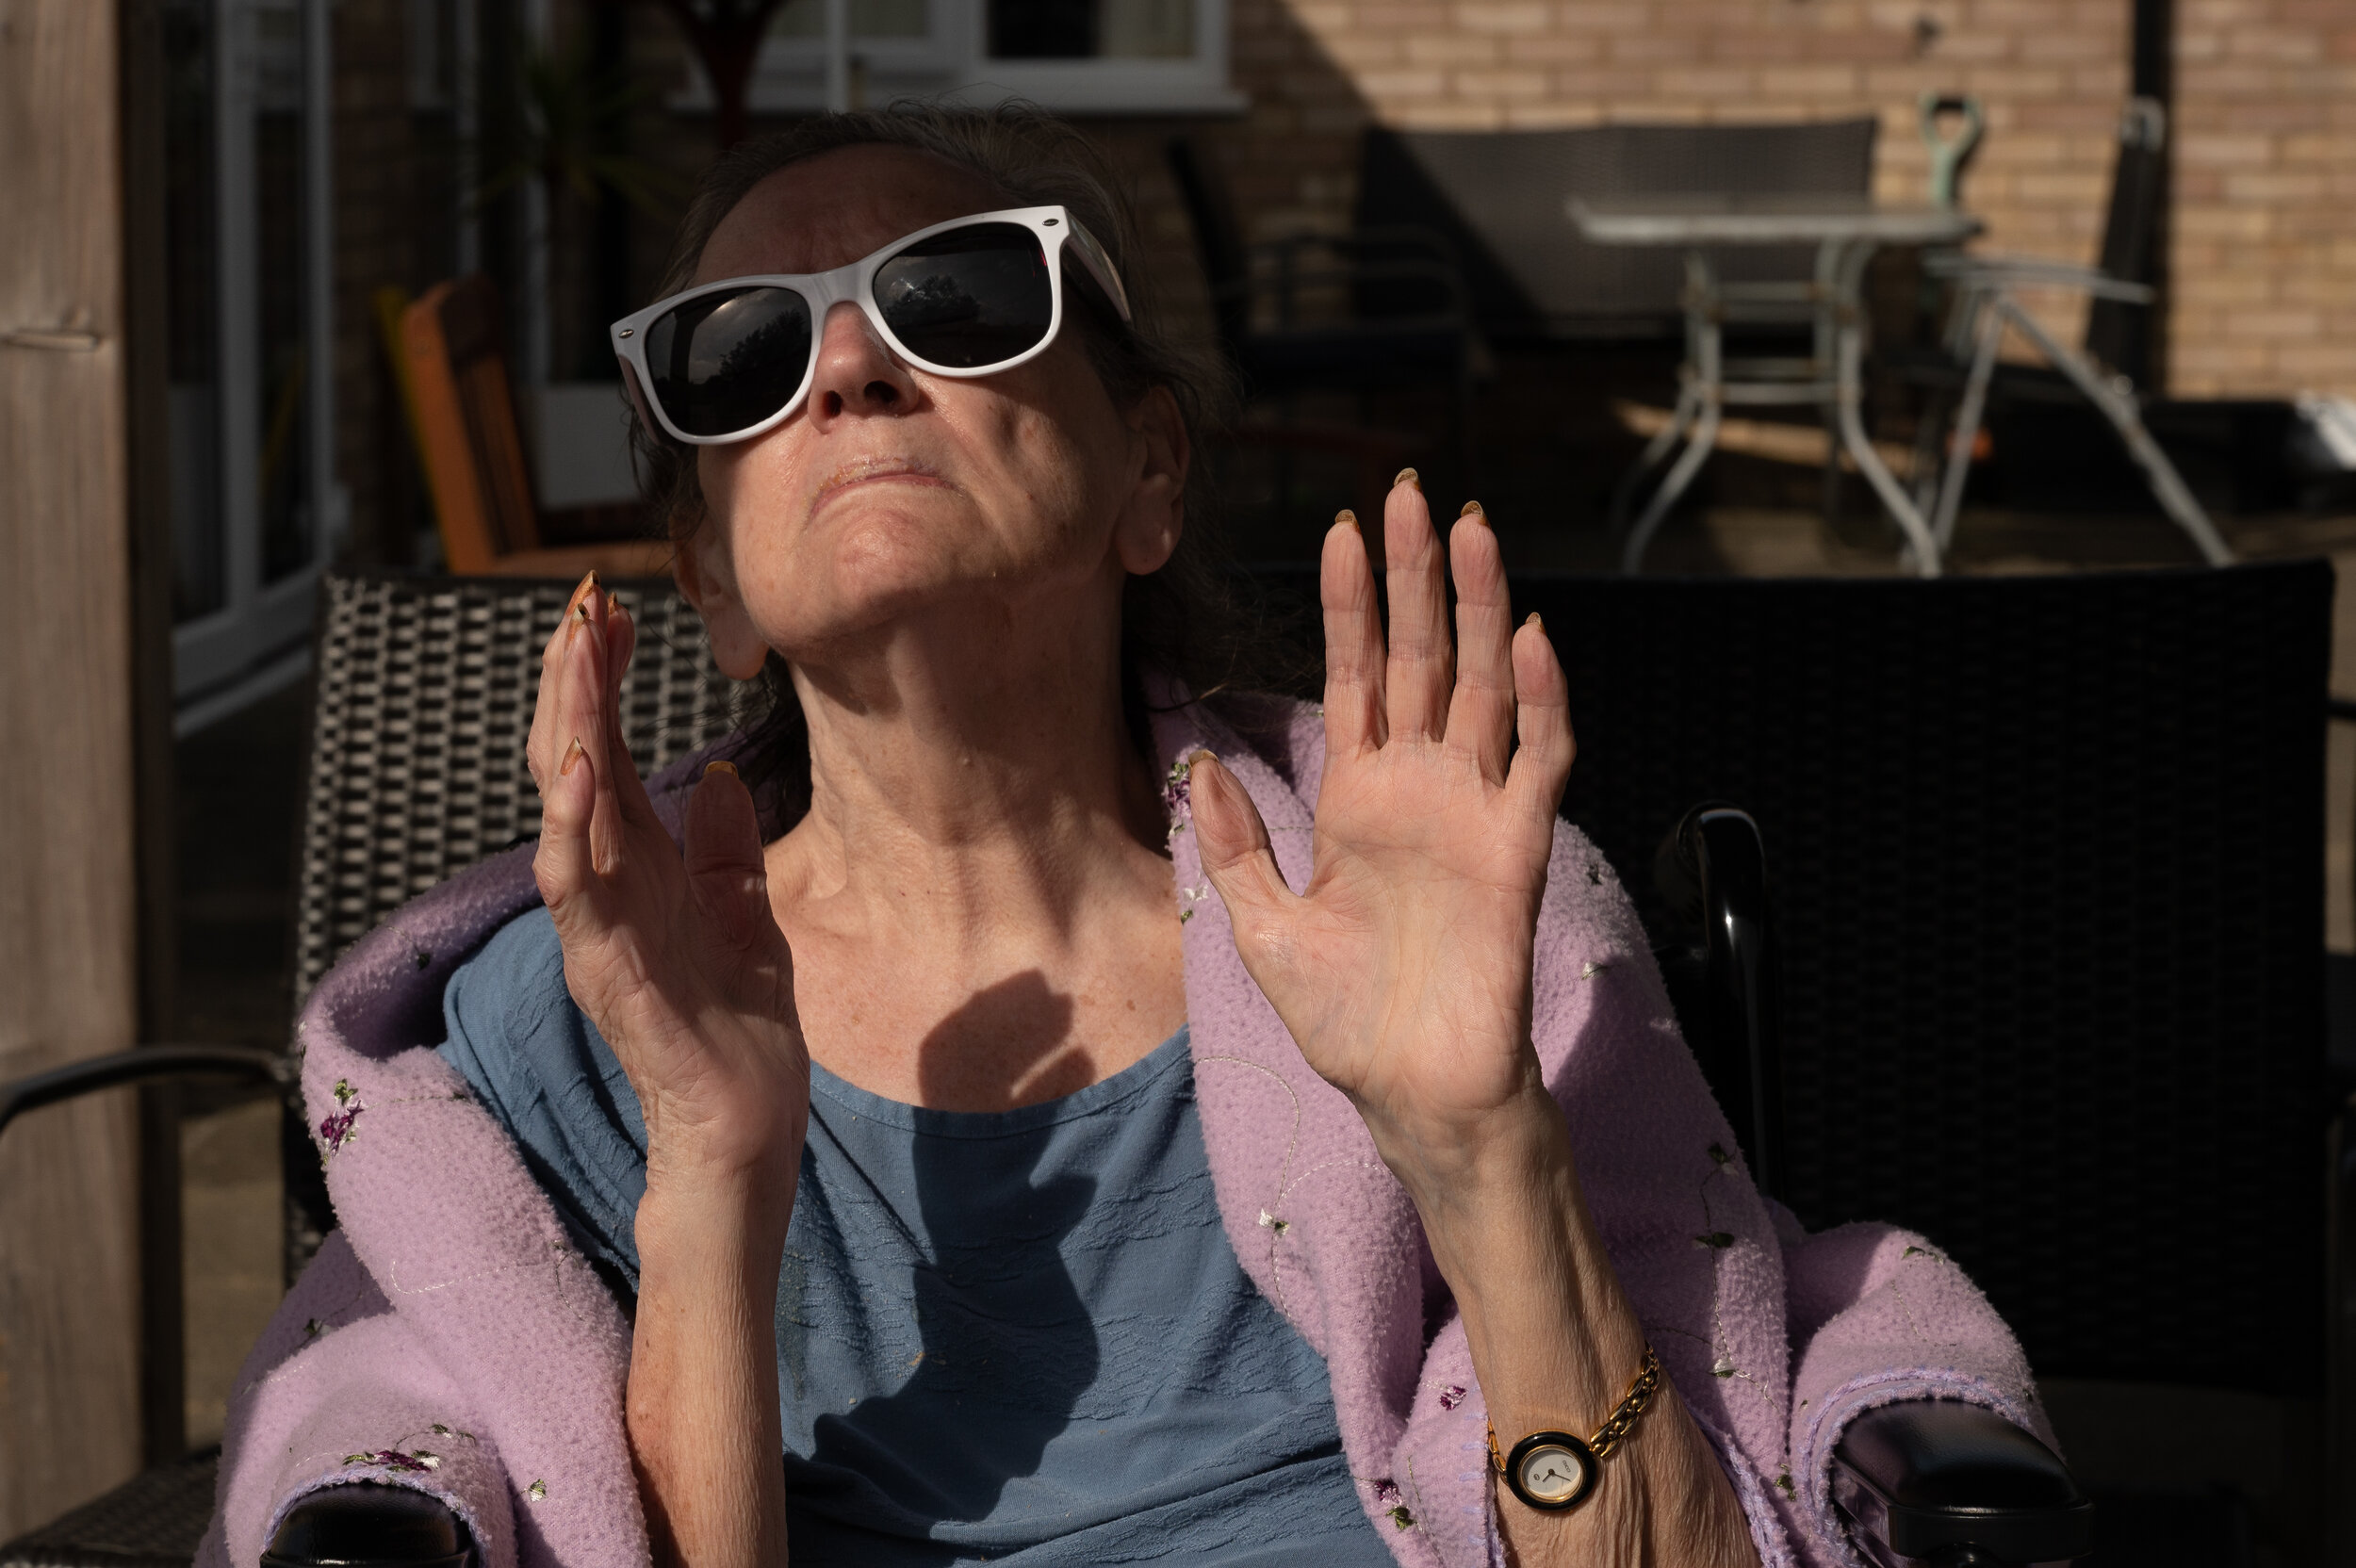  A brief respite between lockdowns brings a chance for Janice to sit outside and enjoy a moment in the sunshine. This was the first time in seven months that her or any of the other residents would have smelled the fresh air or seen the sky with thei